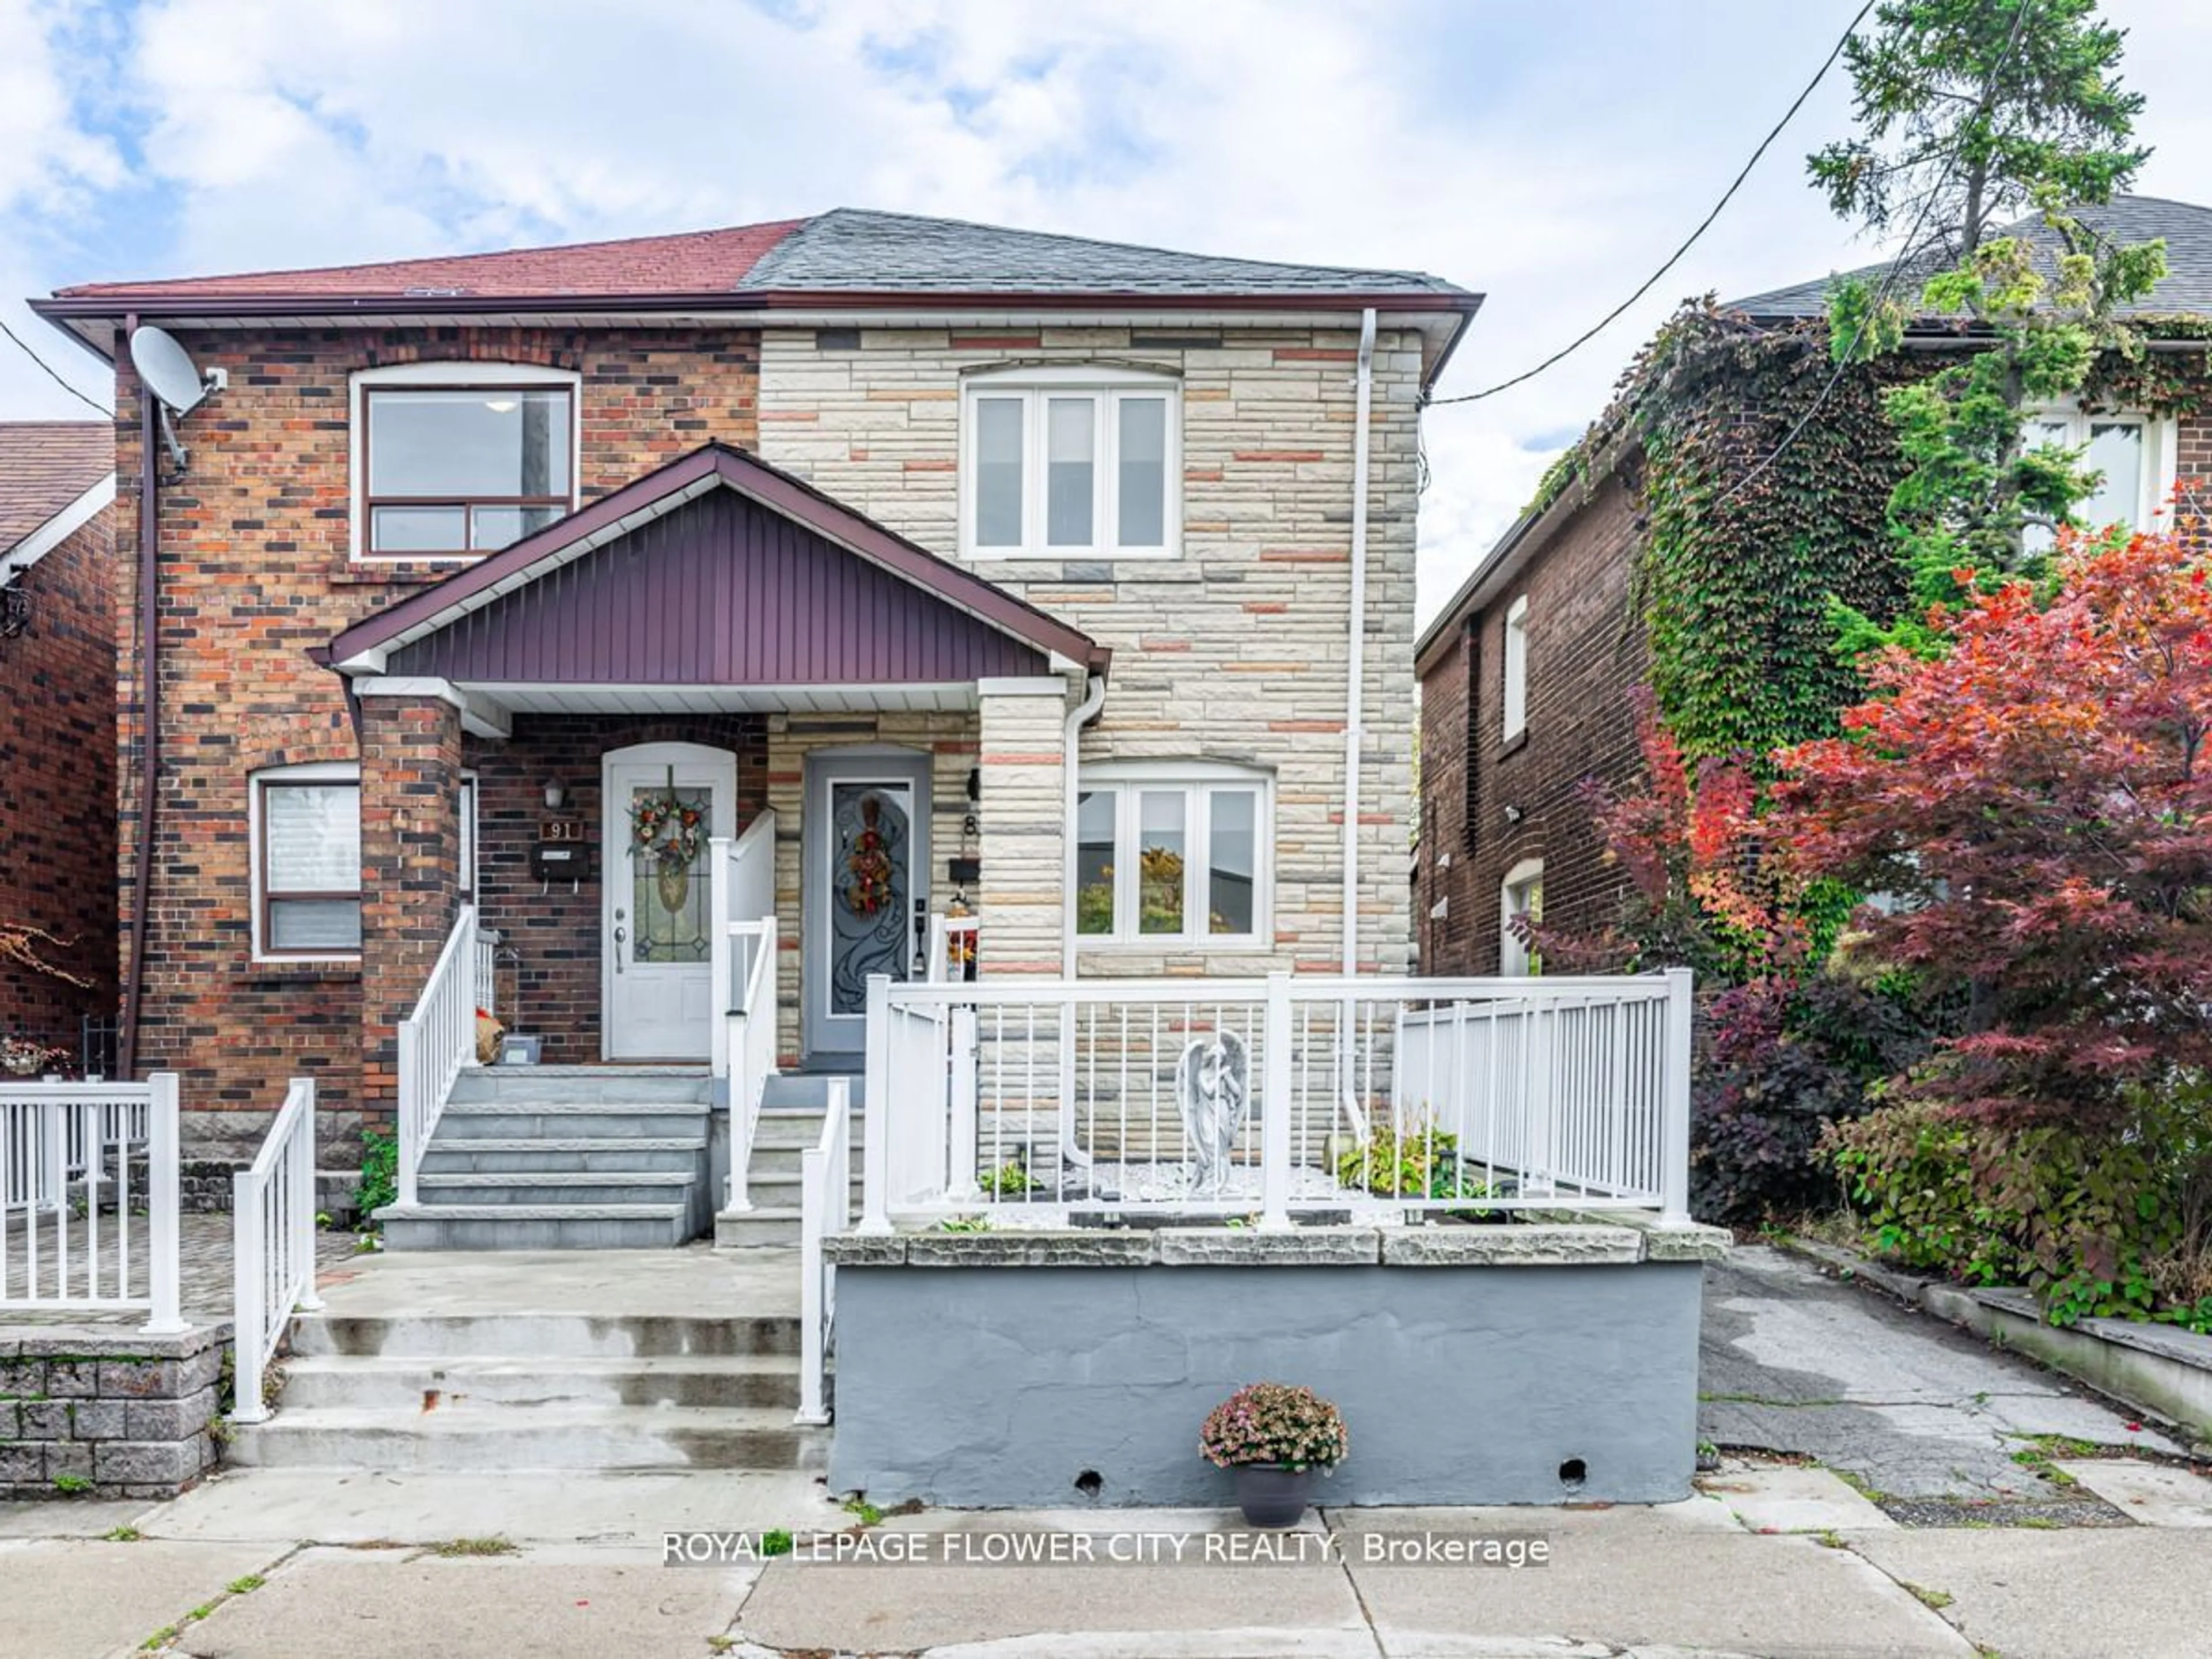 Home with brick exterior material for 89 Miller St, Toronto Ontario M6N 2Z8